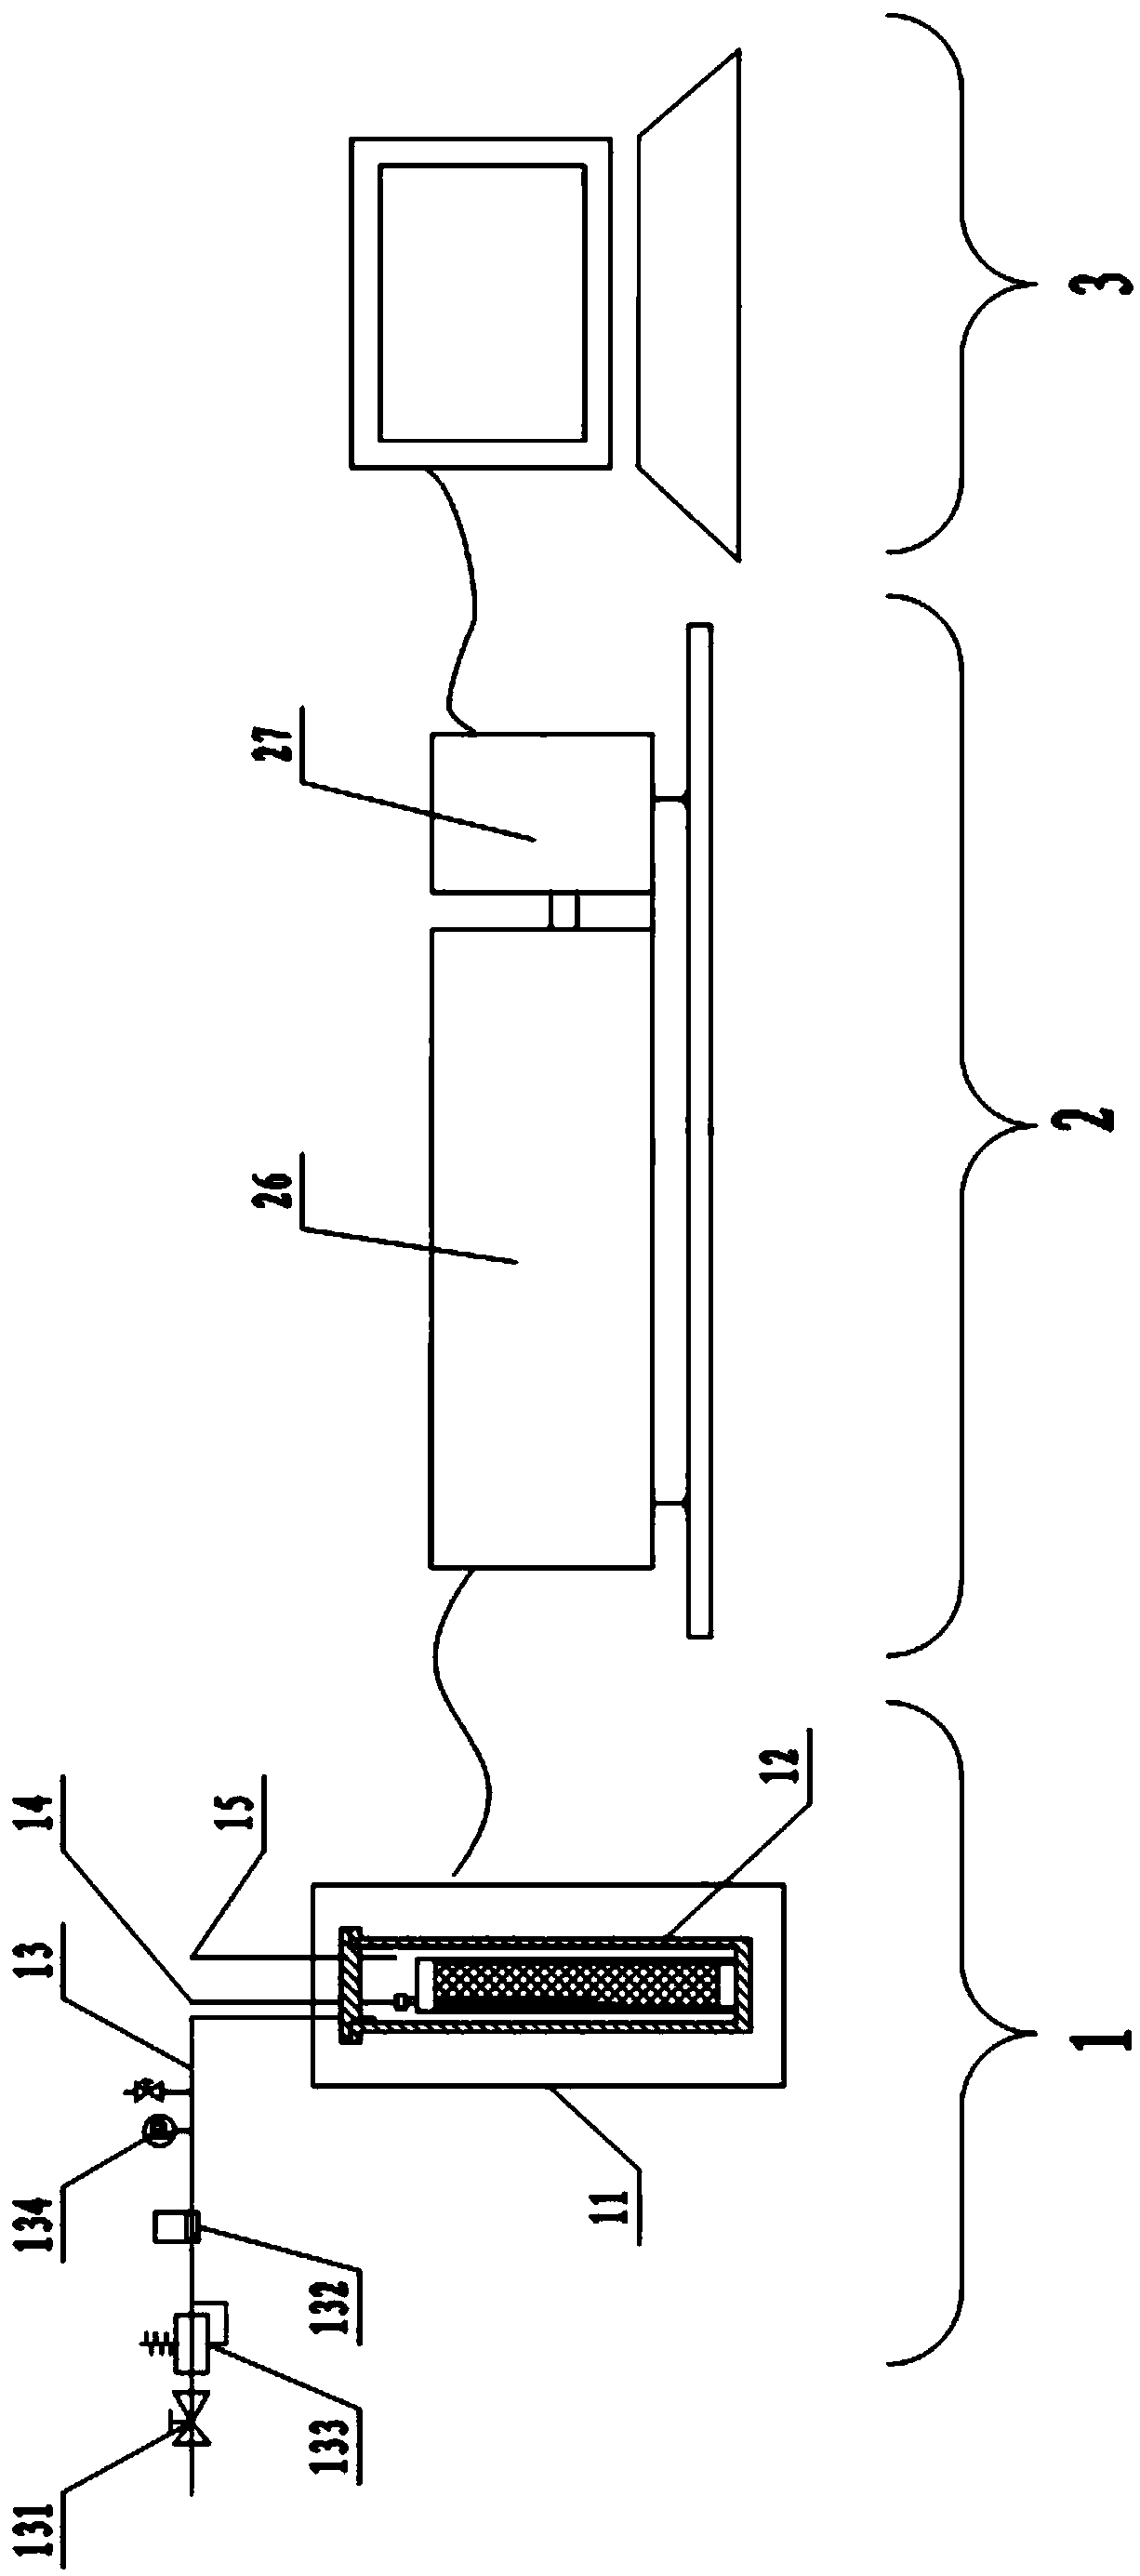 Test system and test method for hydrate core sample